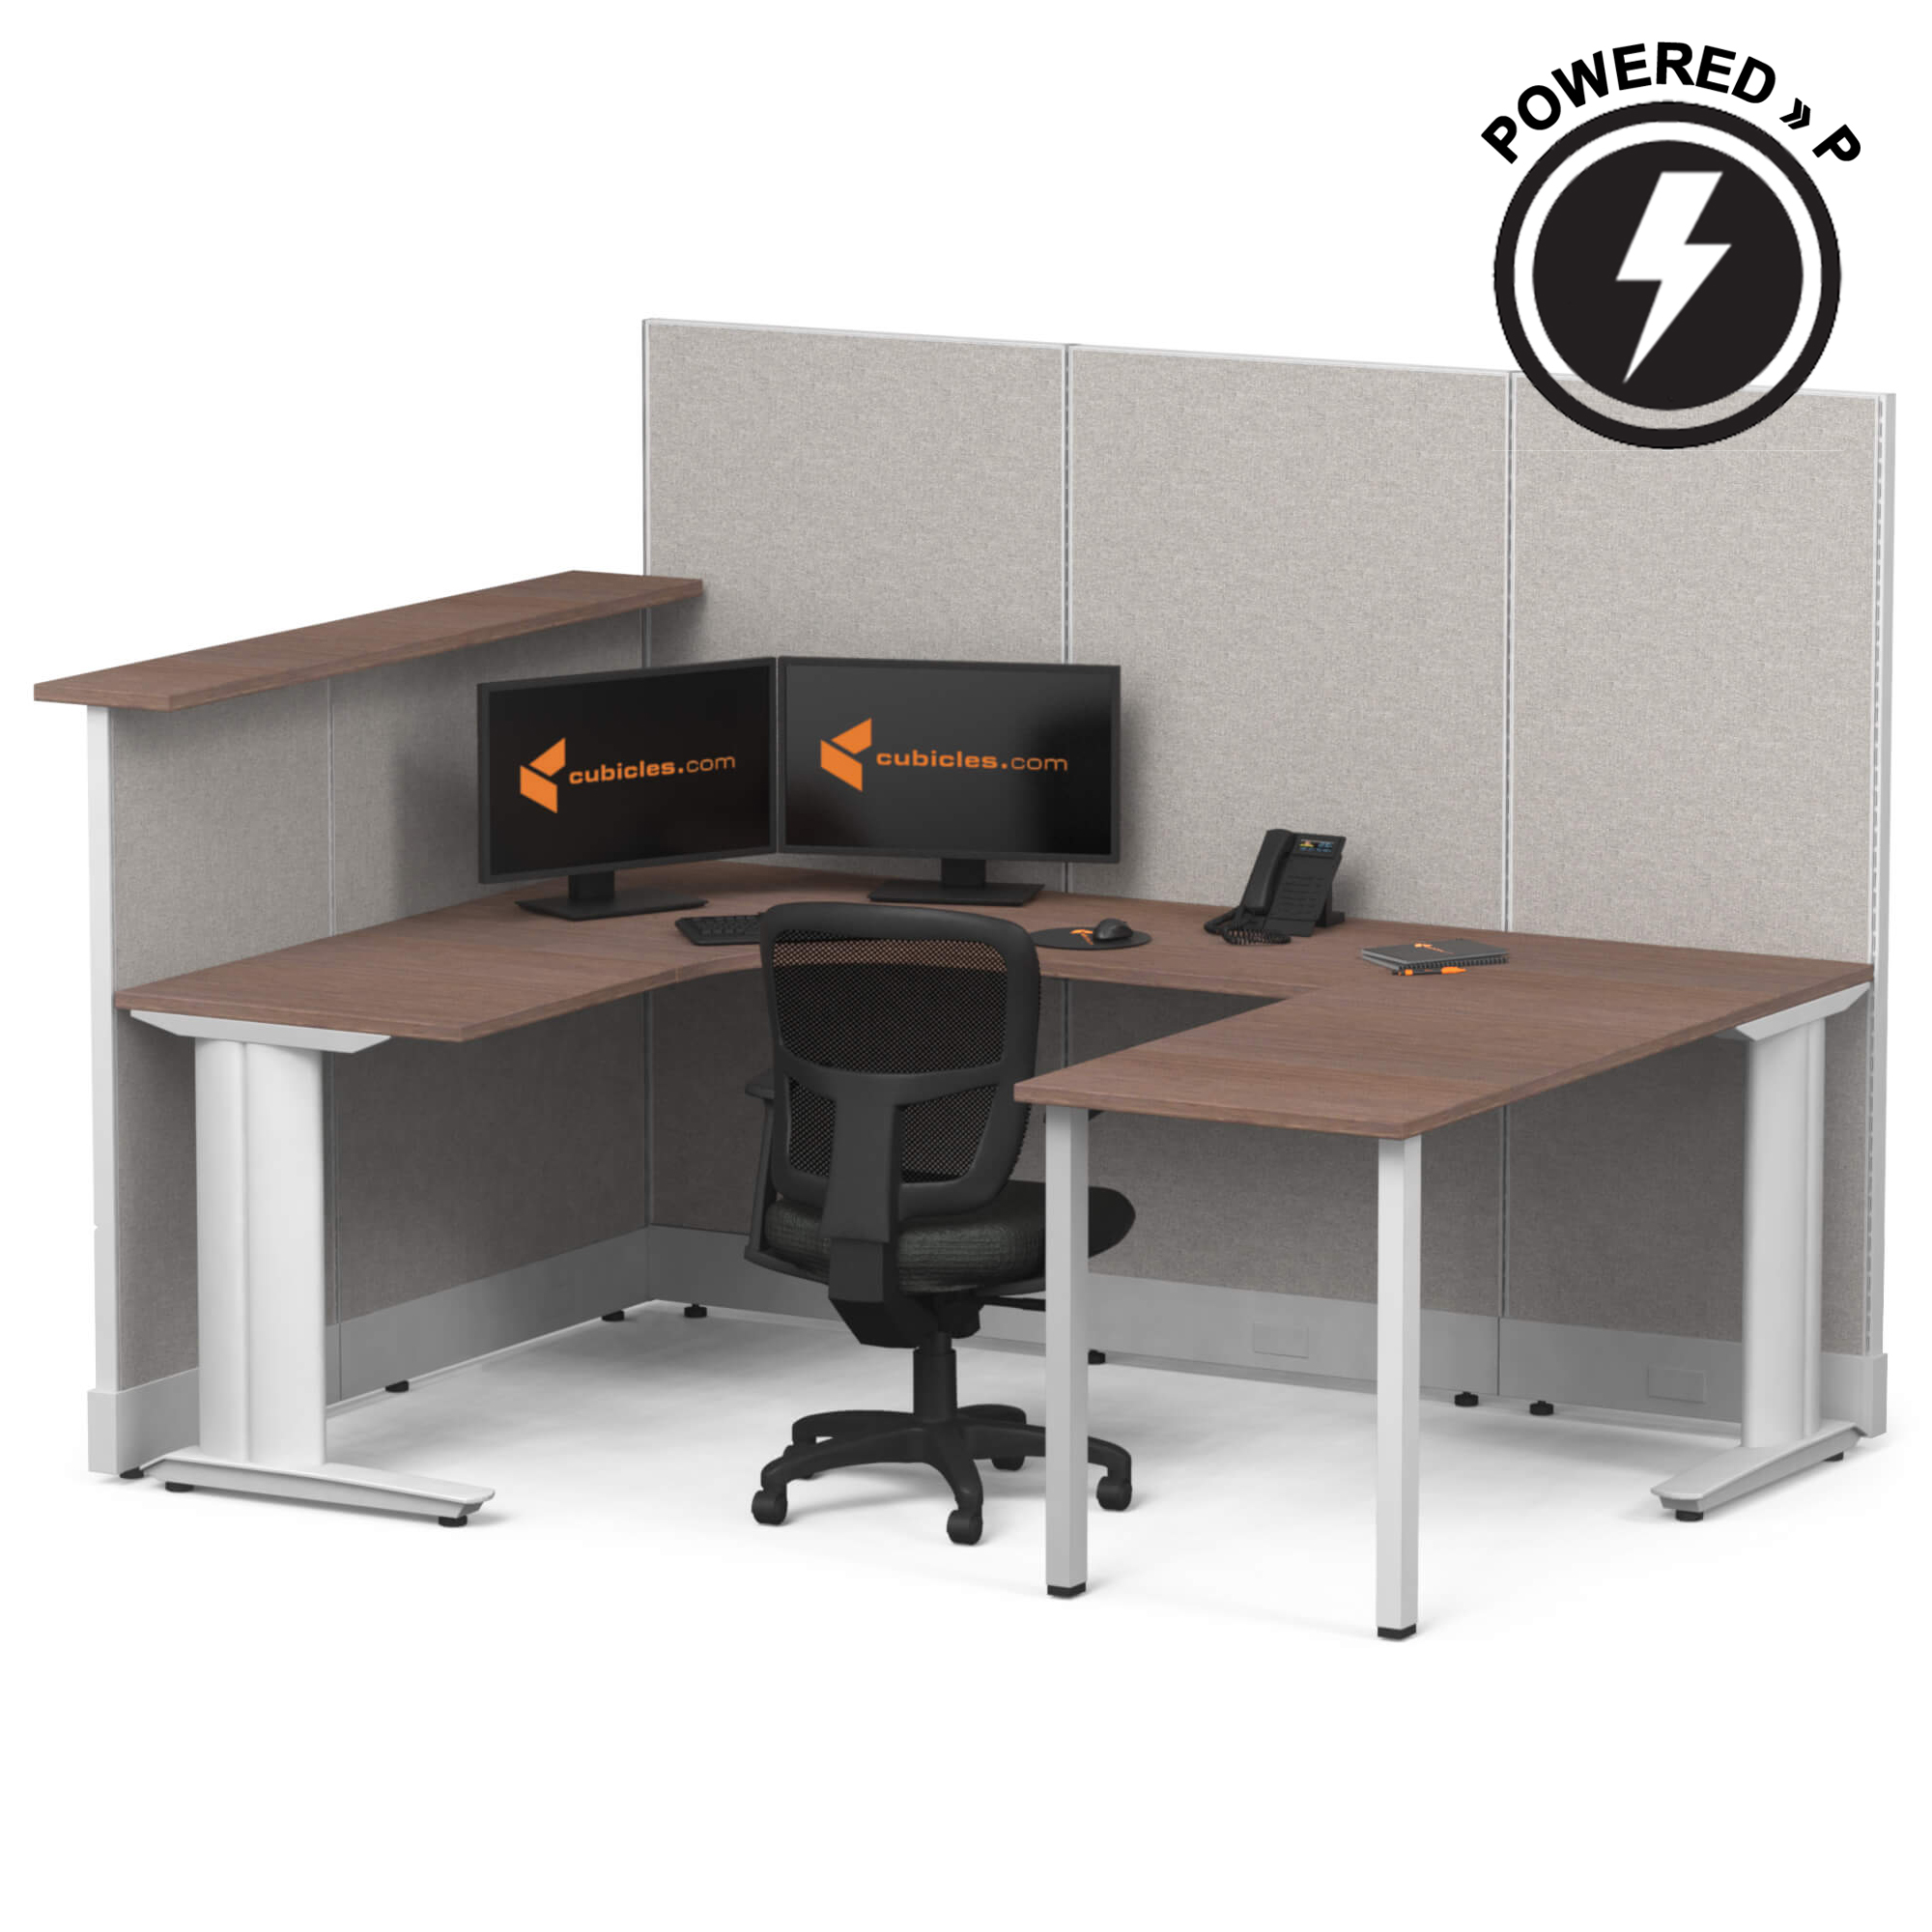 cubicle-desk-u-shaped-workstation-powered-with-transaction-top-sign.jpg